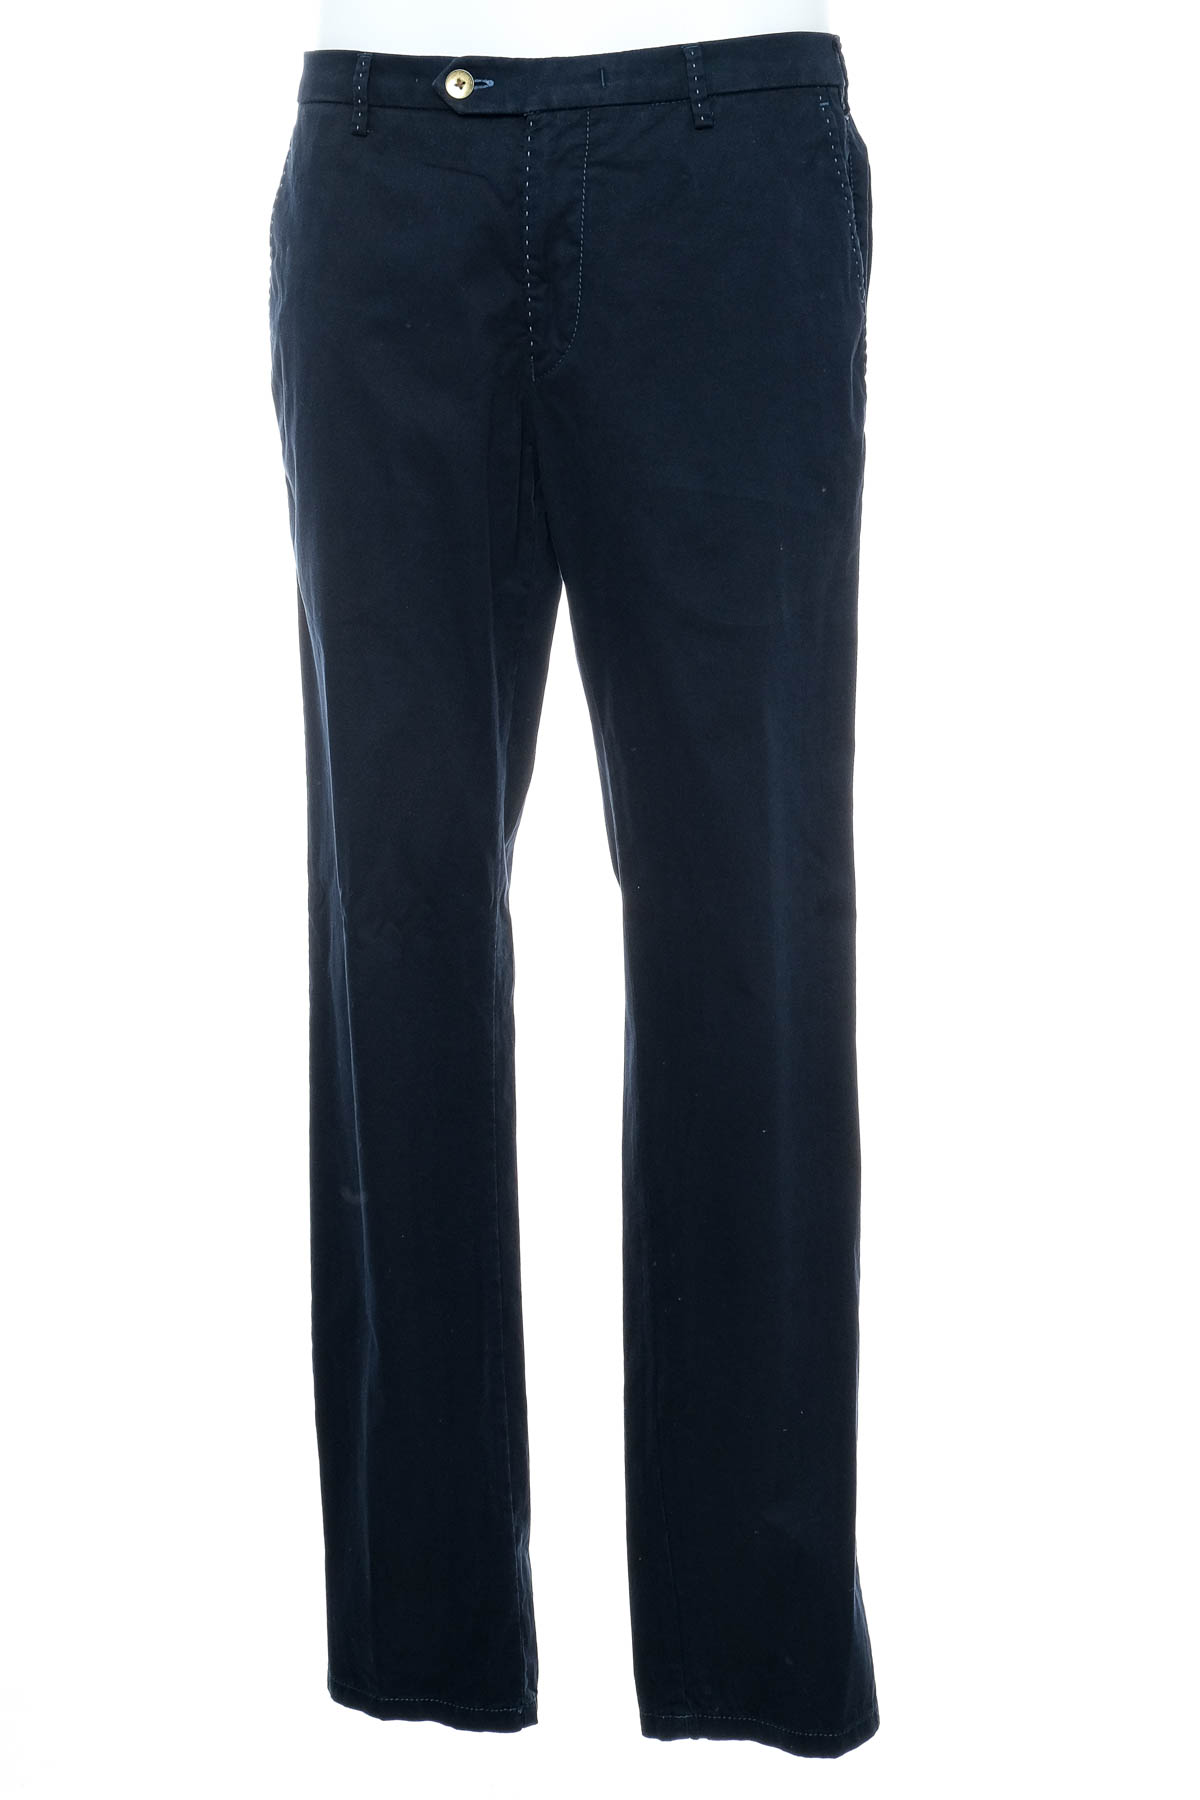 Men's trousers - MMX Germany - 0